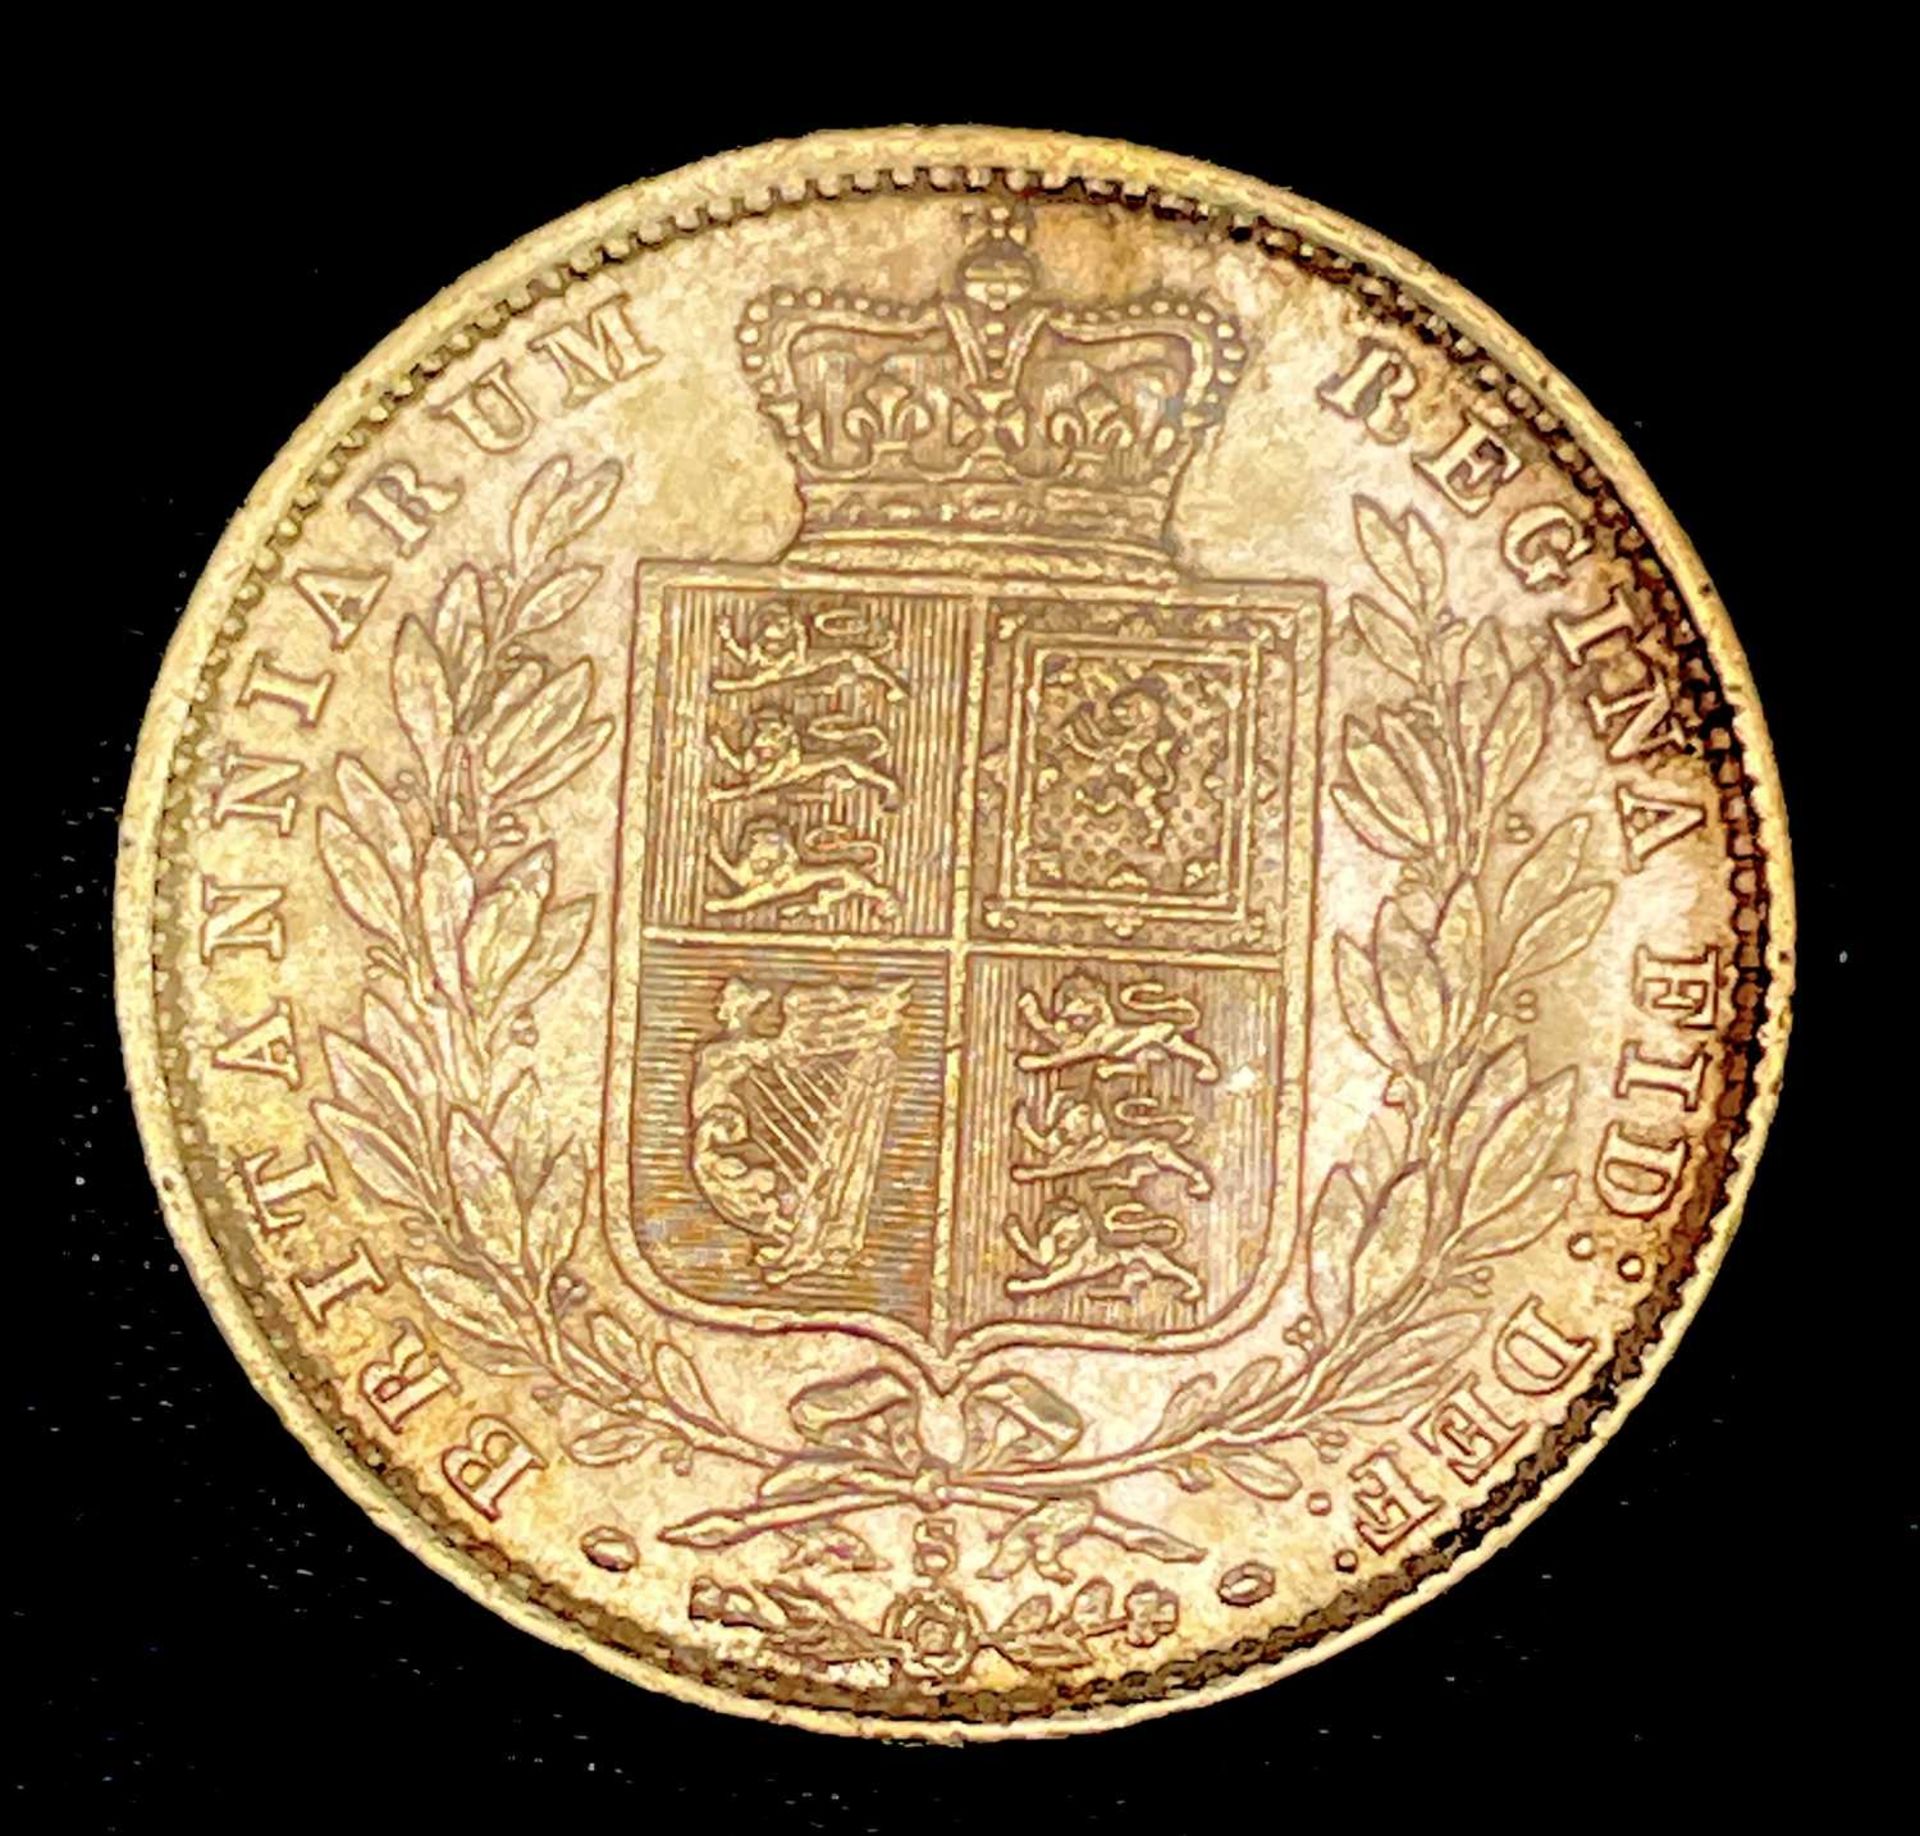 Great Britain Gold Sovereign 1878 Shield Back. Sydney Mint. Condition: please request a condition